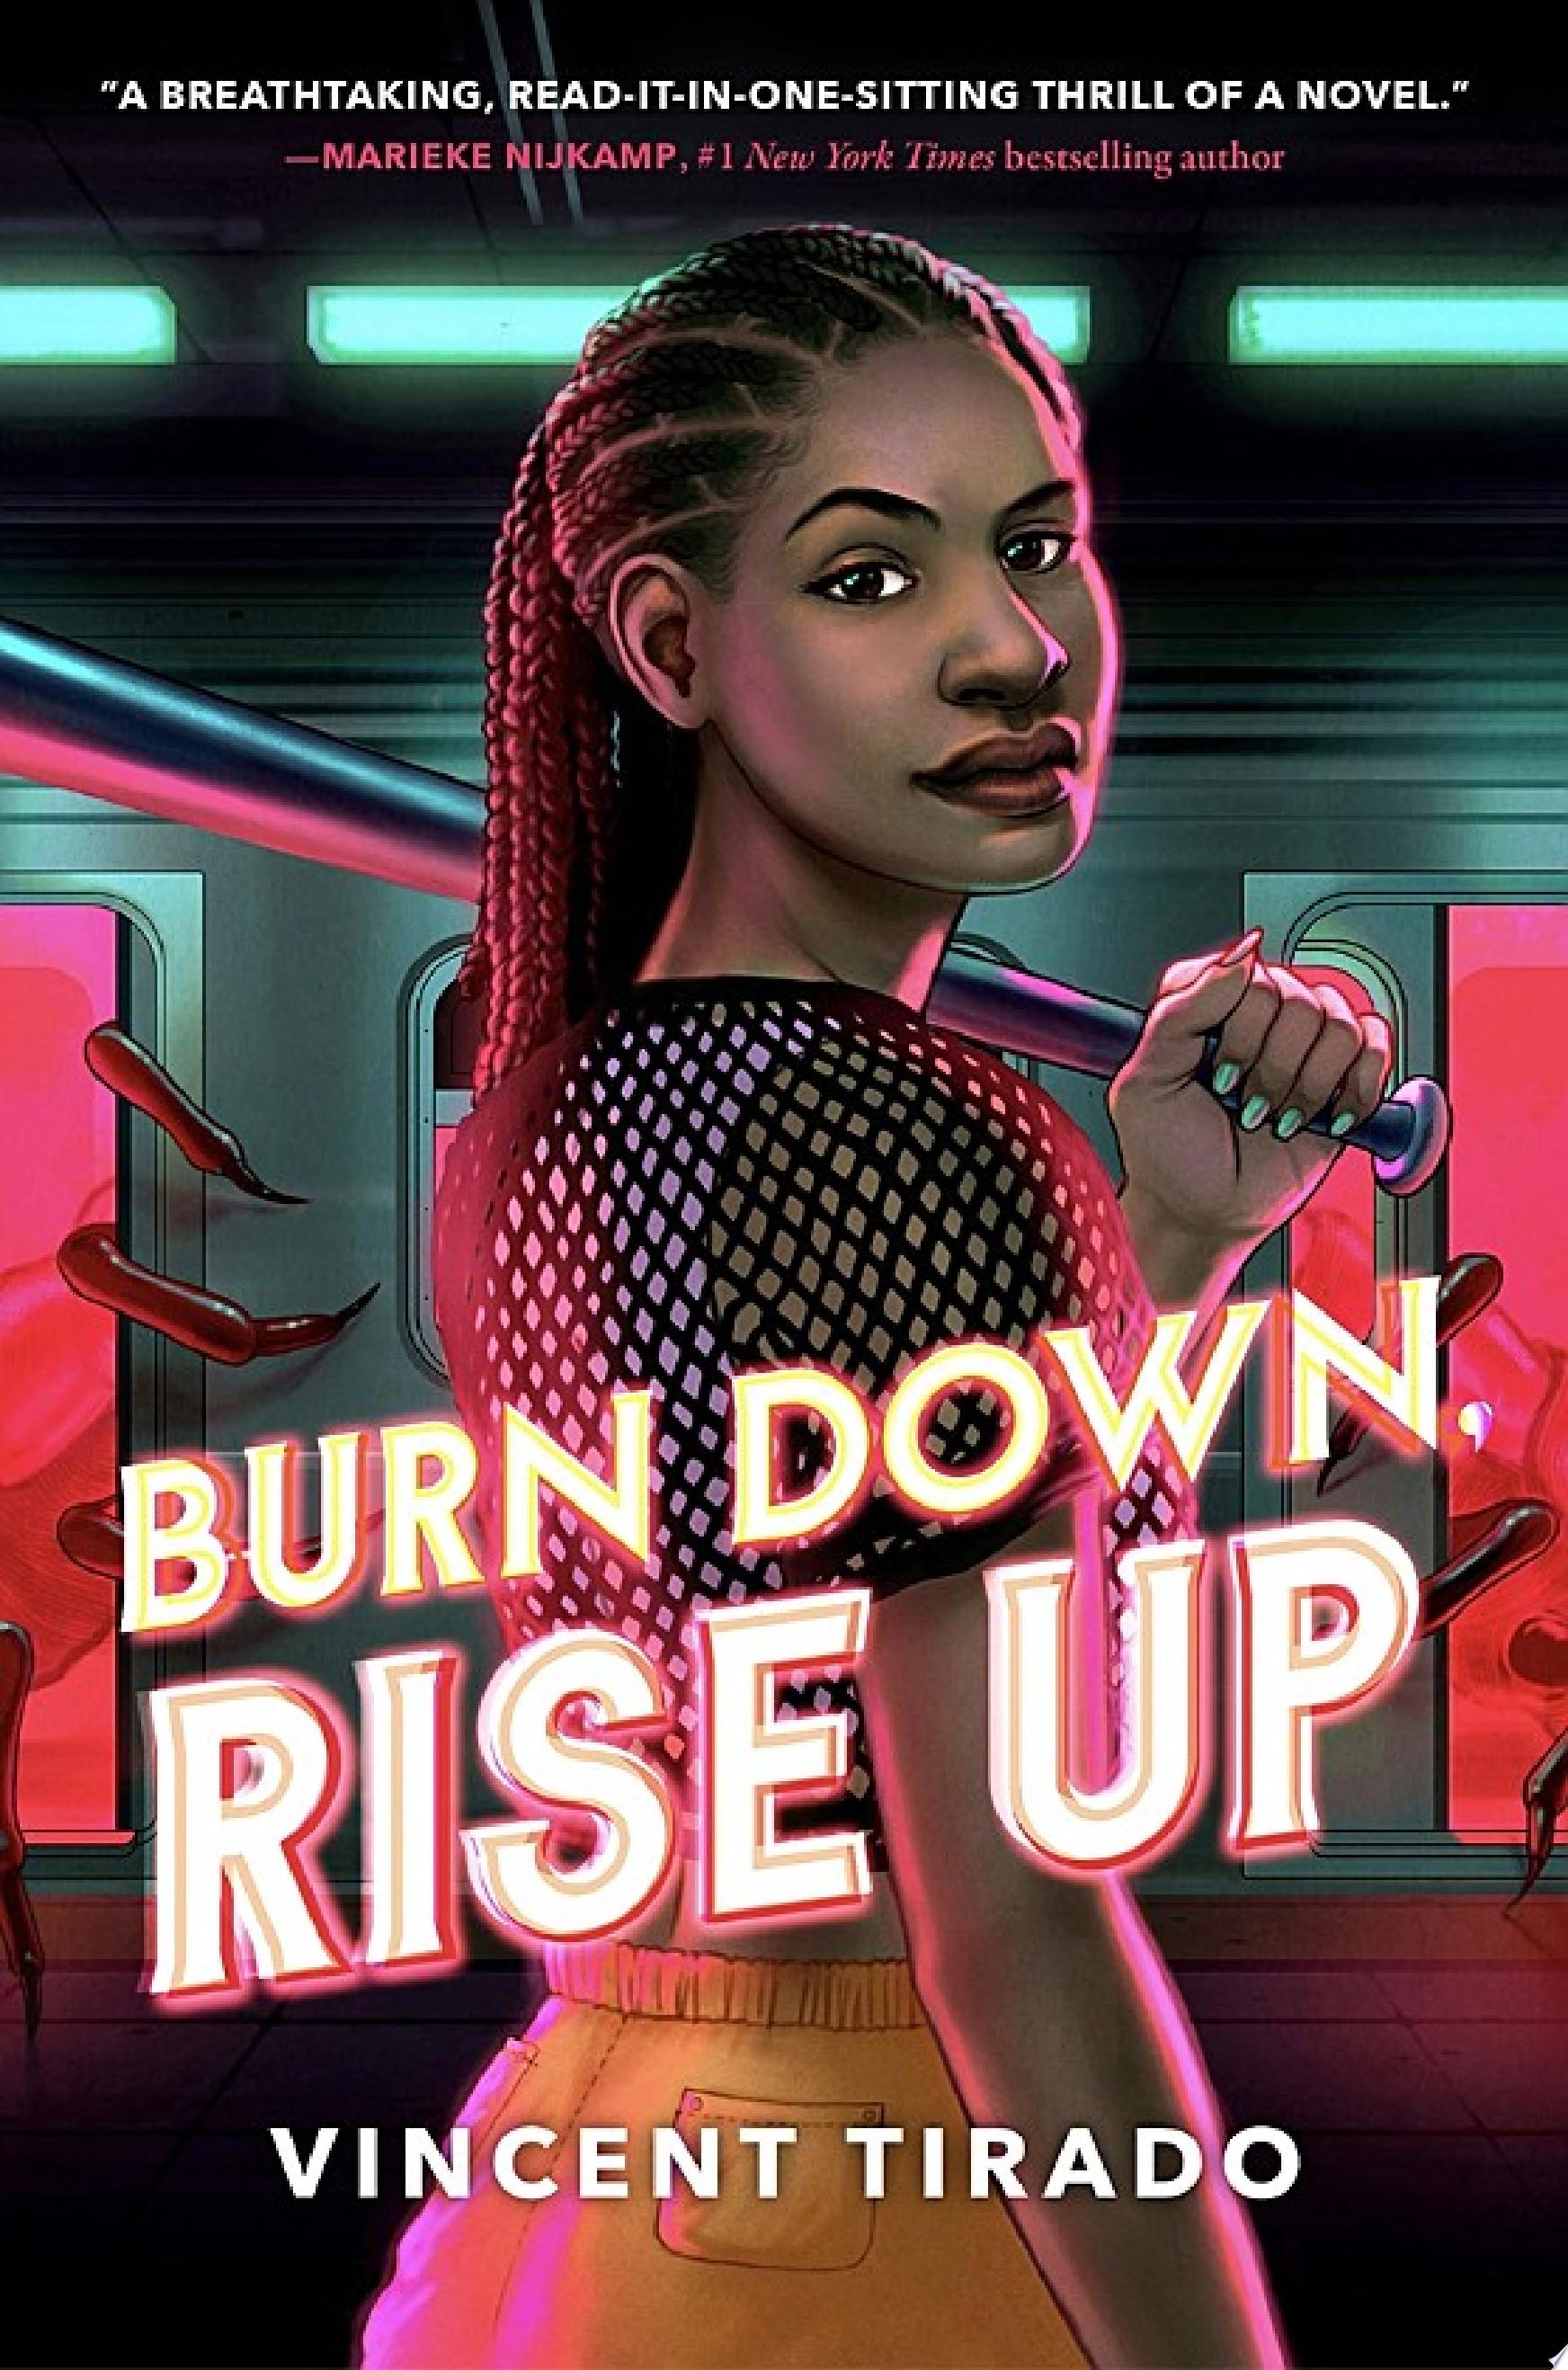 Image for "Burn Down, Rise Up"